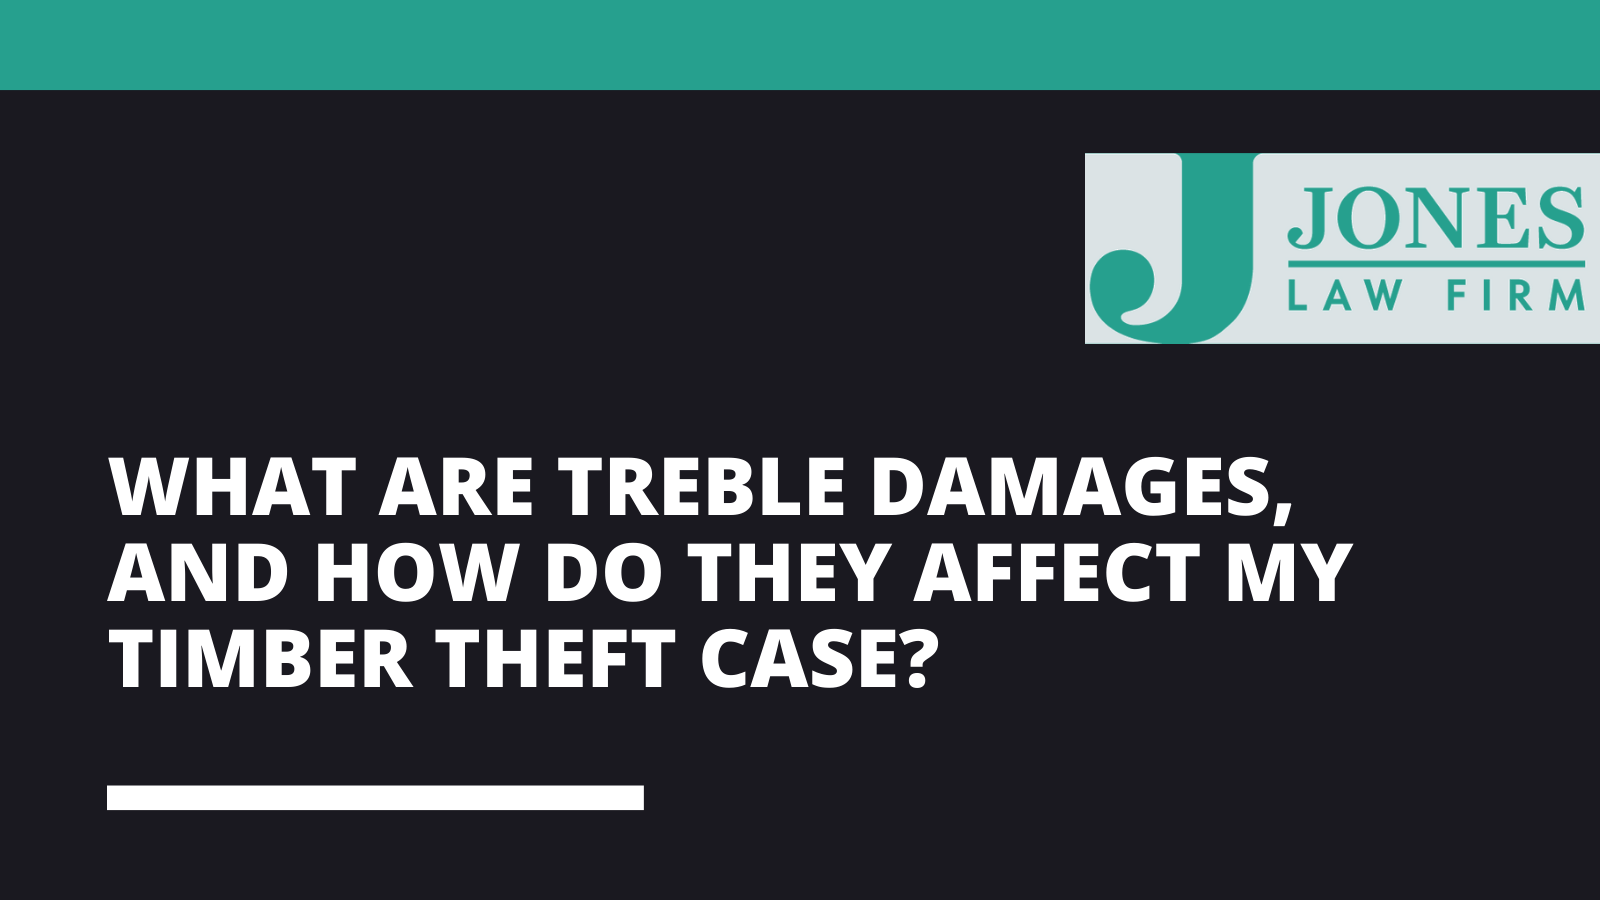 What are treble damages, and how do they affect my timber theft case - Jones law firm - Alexandria louisiana